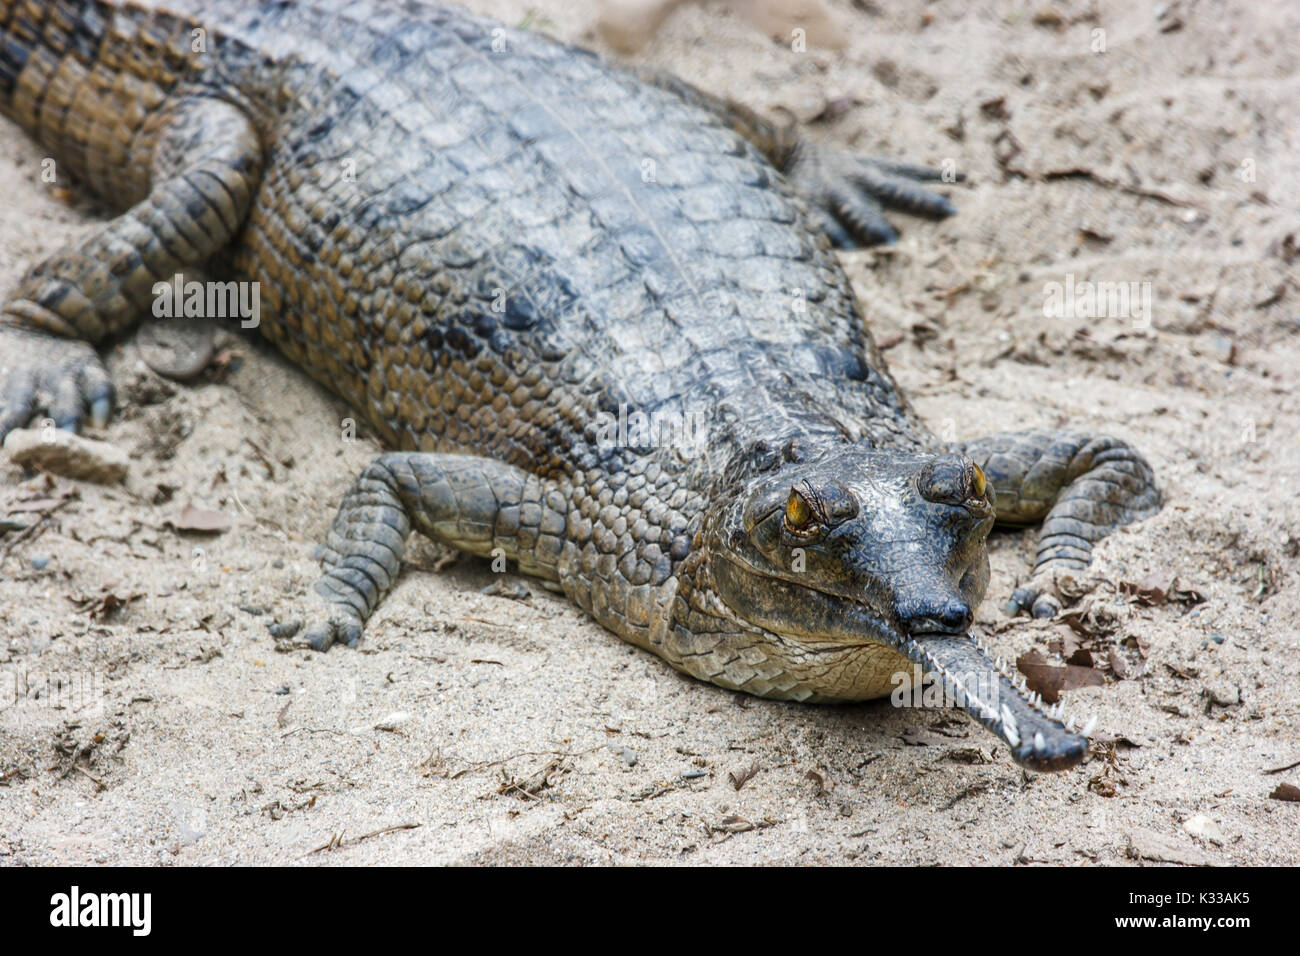 Gharial crocodile with narrow snout at the Chitwan National Park, Nepal Stock Photo